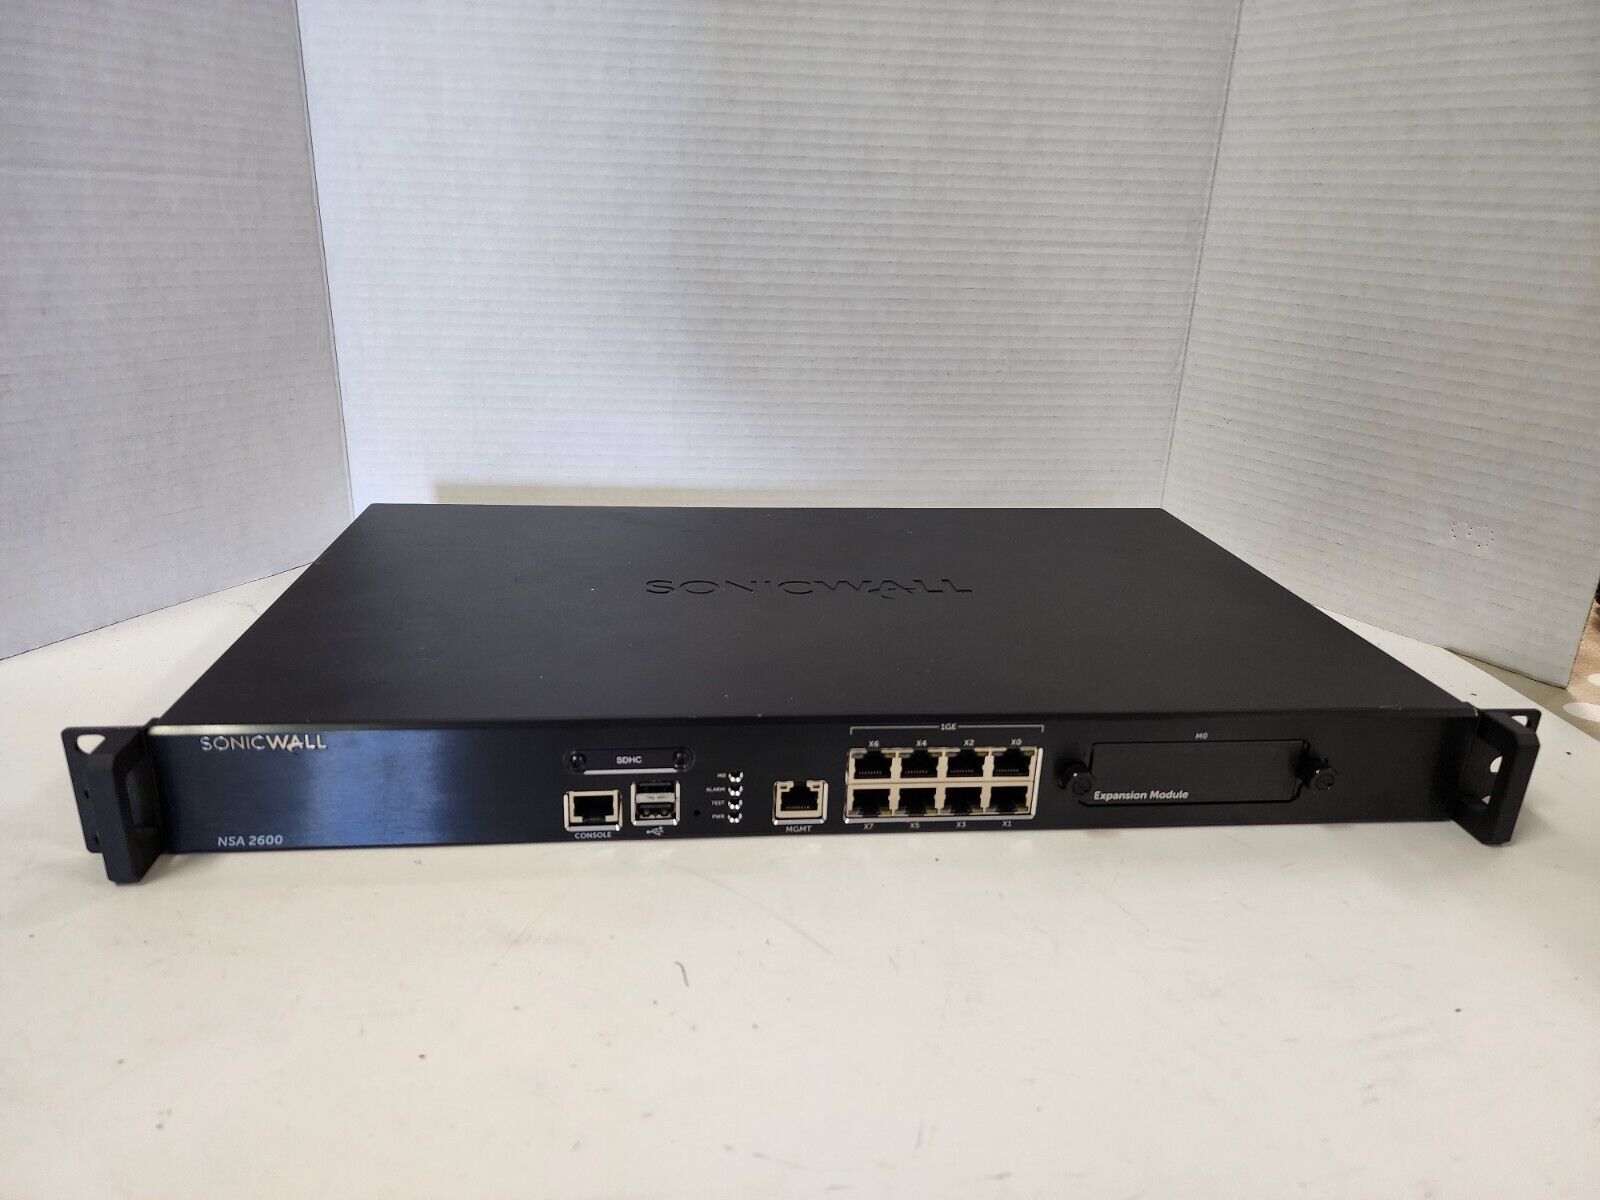 Dell SonicWall NSA 2600 8-Port Network Security Appliance w/ RACK EARS -TESTED